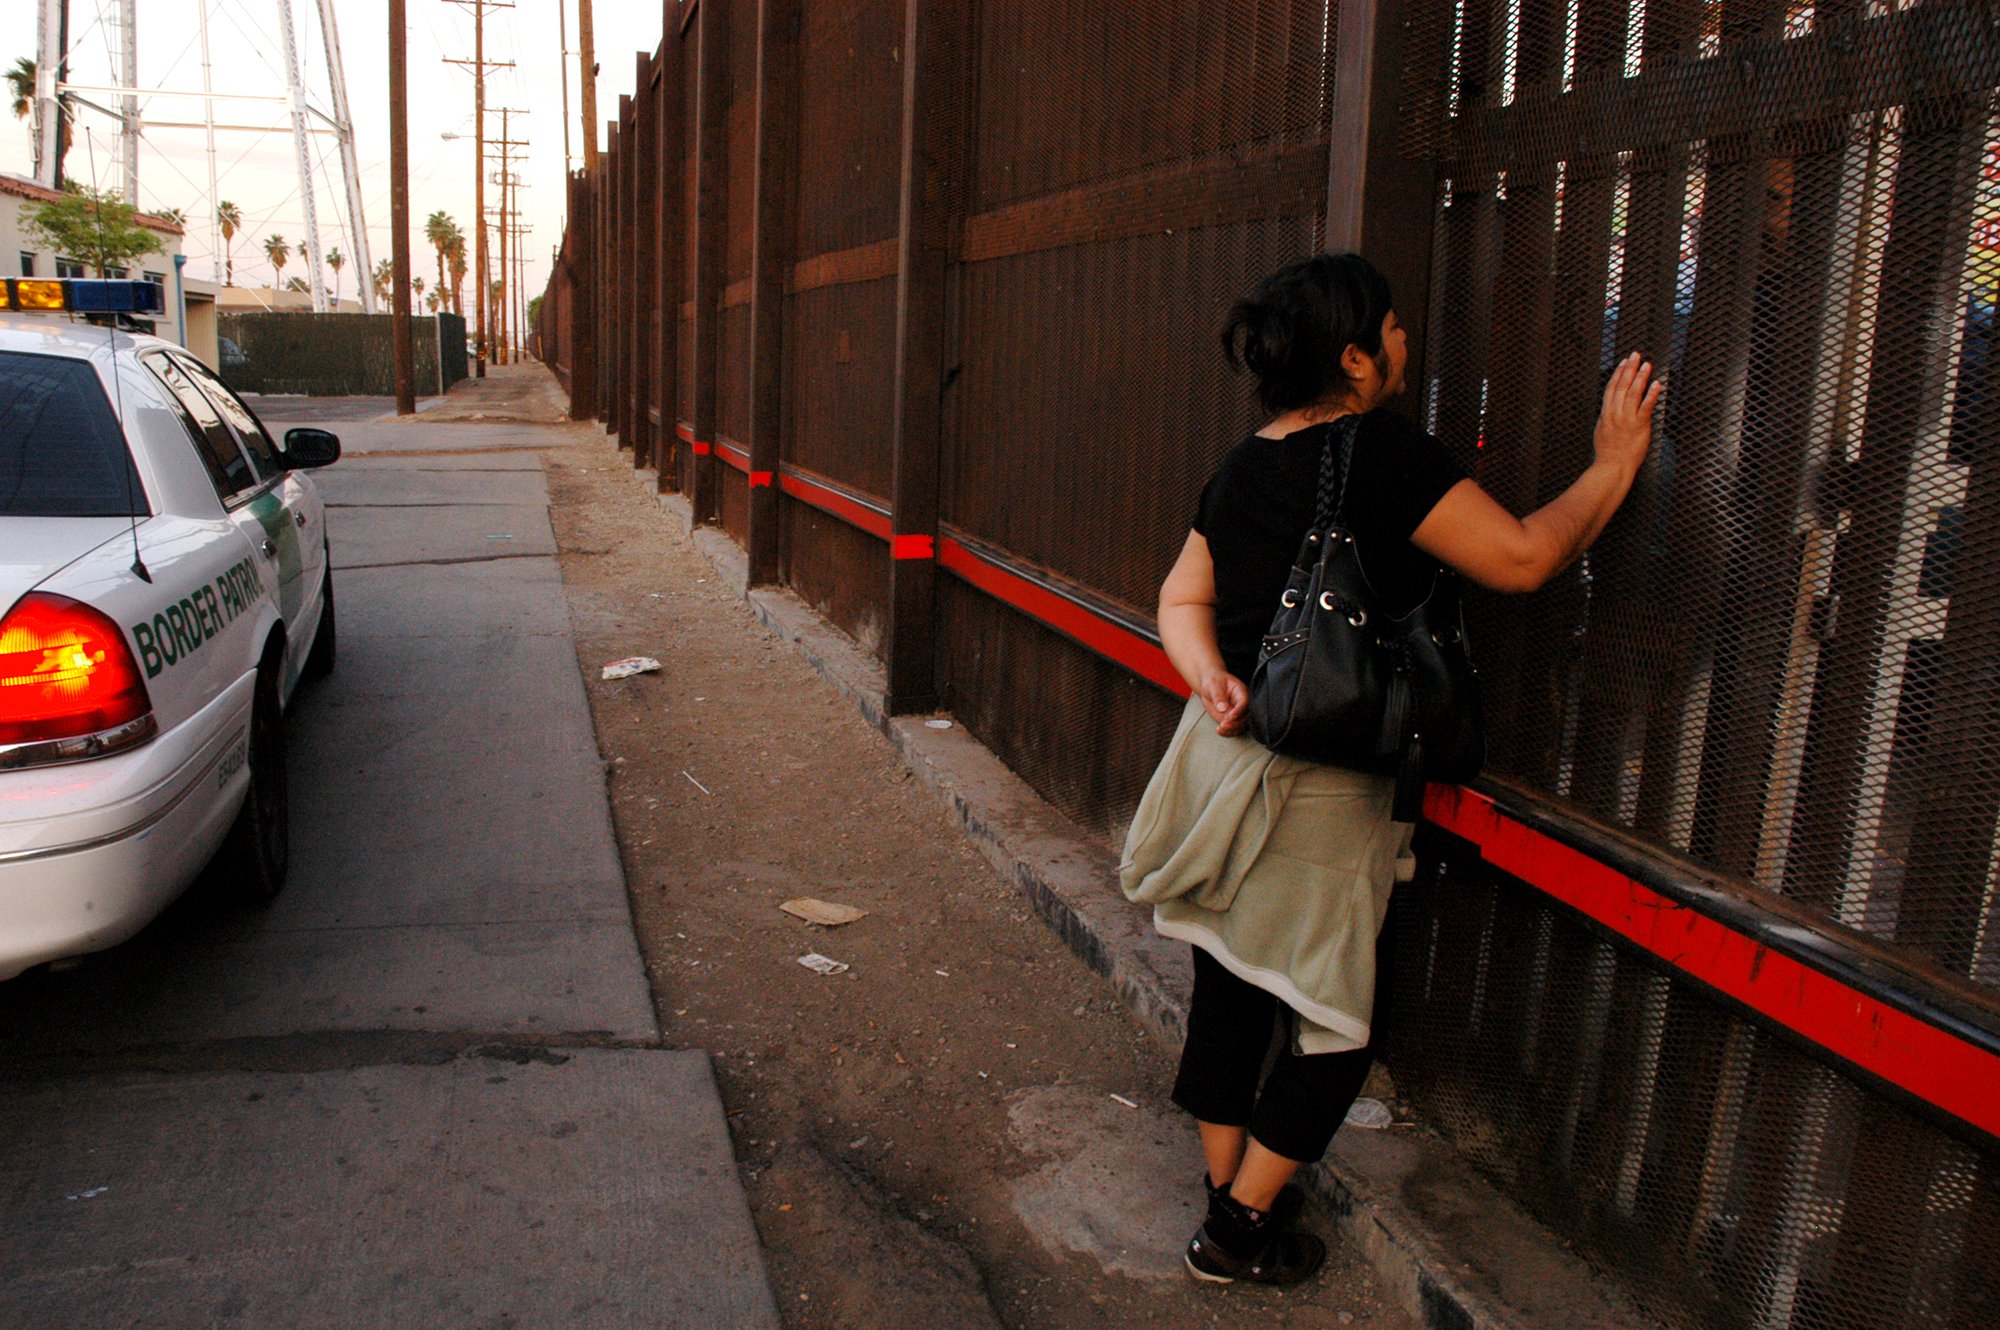   &nbsp;A woman (on the California side of the fence) meets her husband (on the Mexico side of the fence) to talk. She works in California, and does so legally, but while her permit and documents are being renewed she stays in the U.S. rather than re